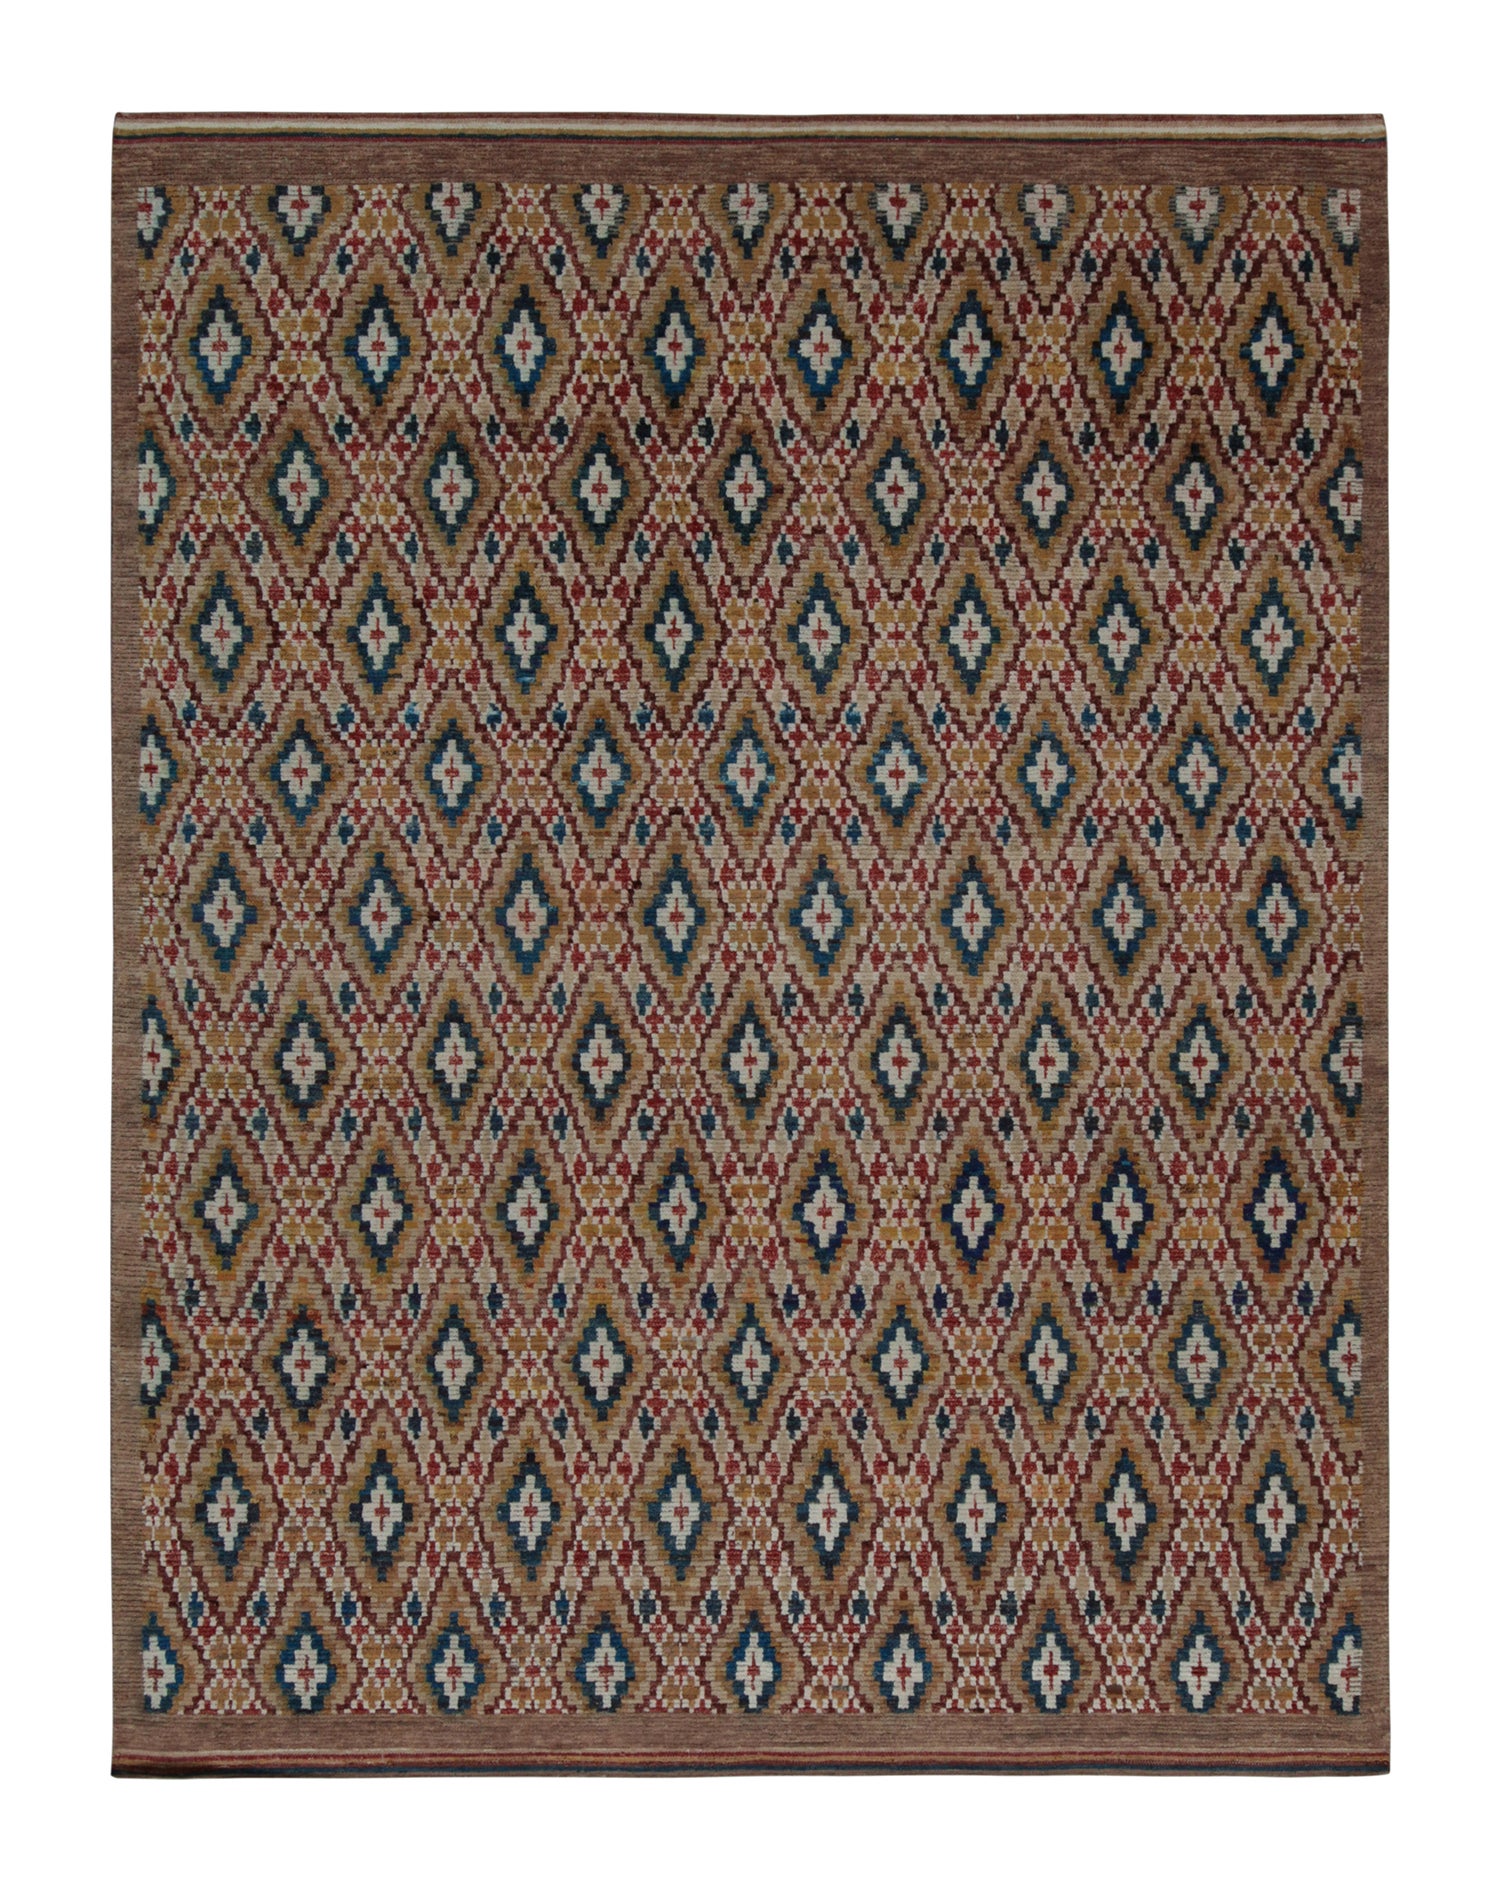 Rug & Kilim’s Moroccan style rug in Brown, Red and Blue Diamond Patterns For Sale